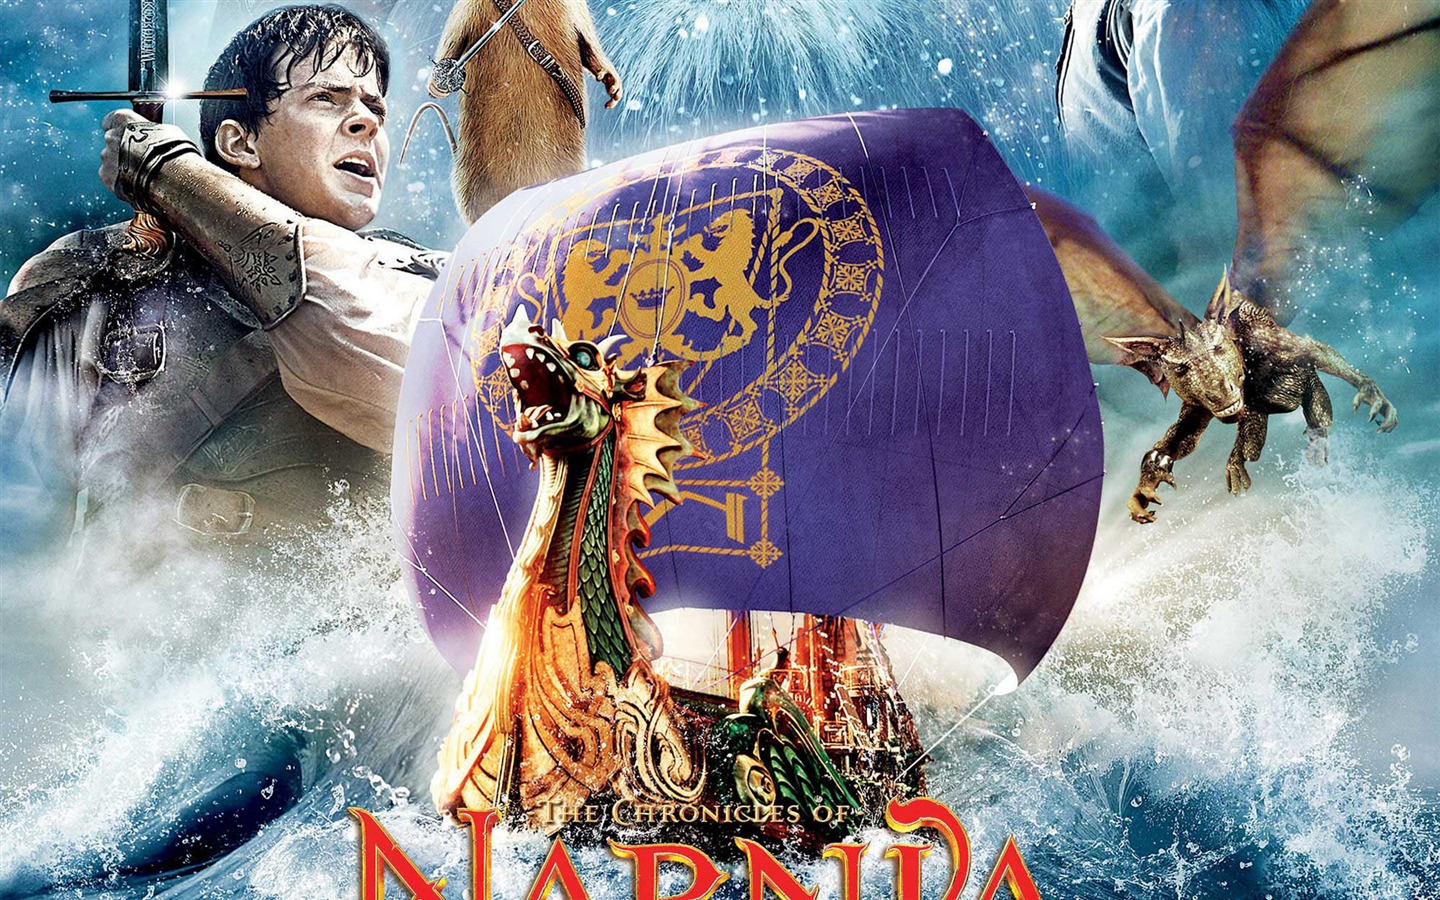 The Chronicles of Narnia: The Voyage of the fonds d'écran Passeur d'Aurore #1 - 1440x900